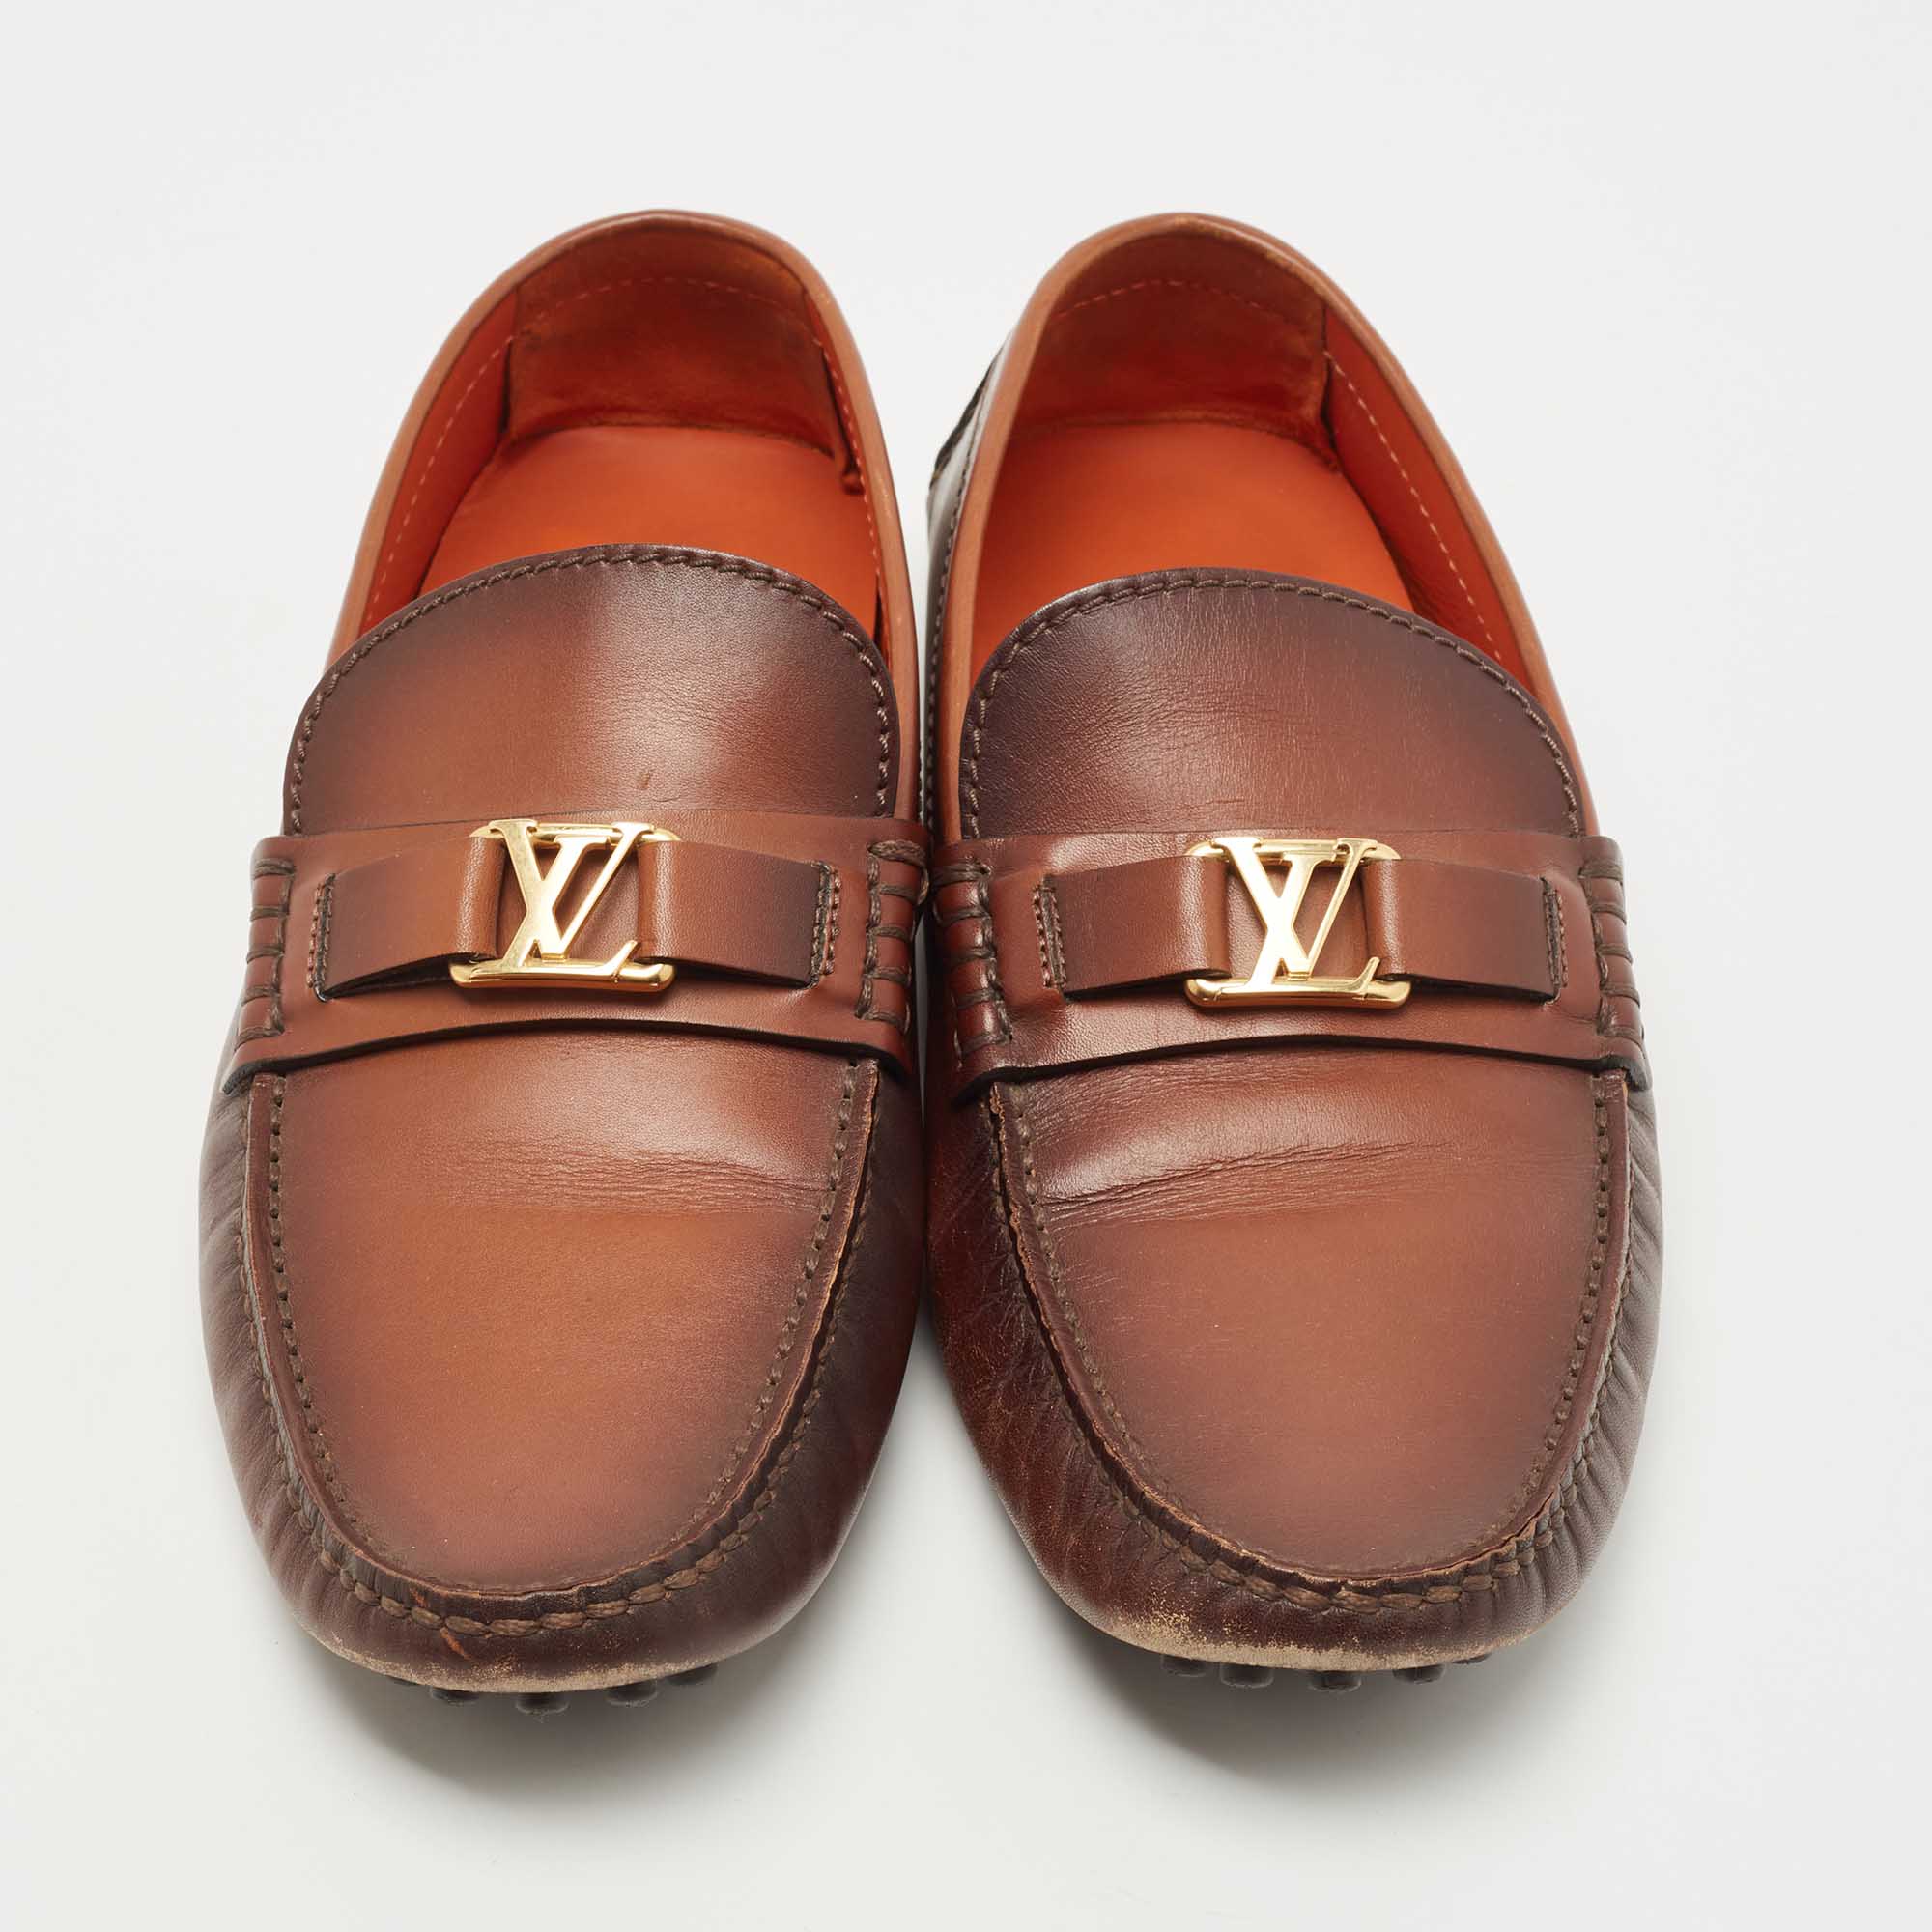 Louis Vuitton Two Tone Leather Hockenheim Loafers Size 42